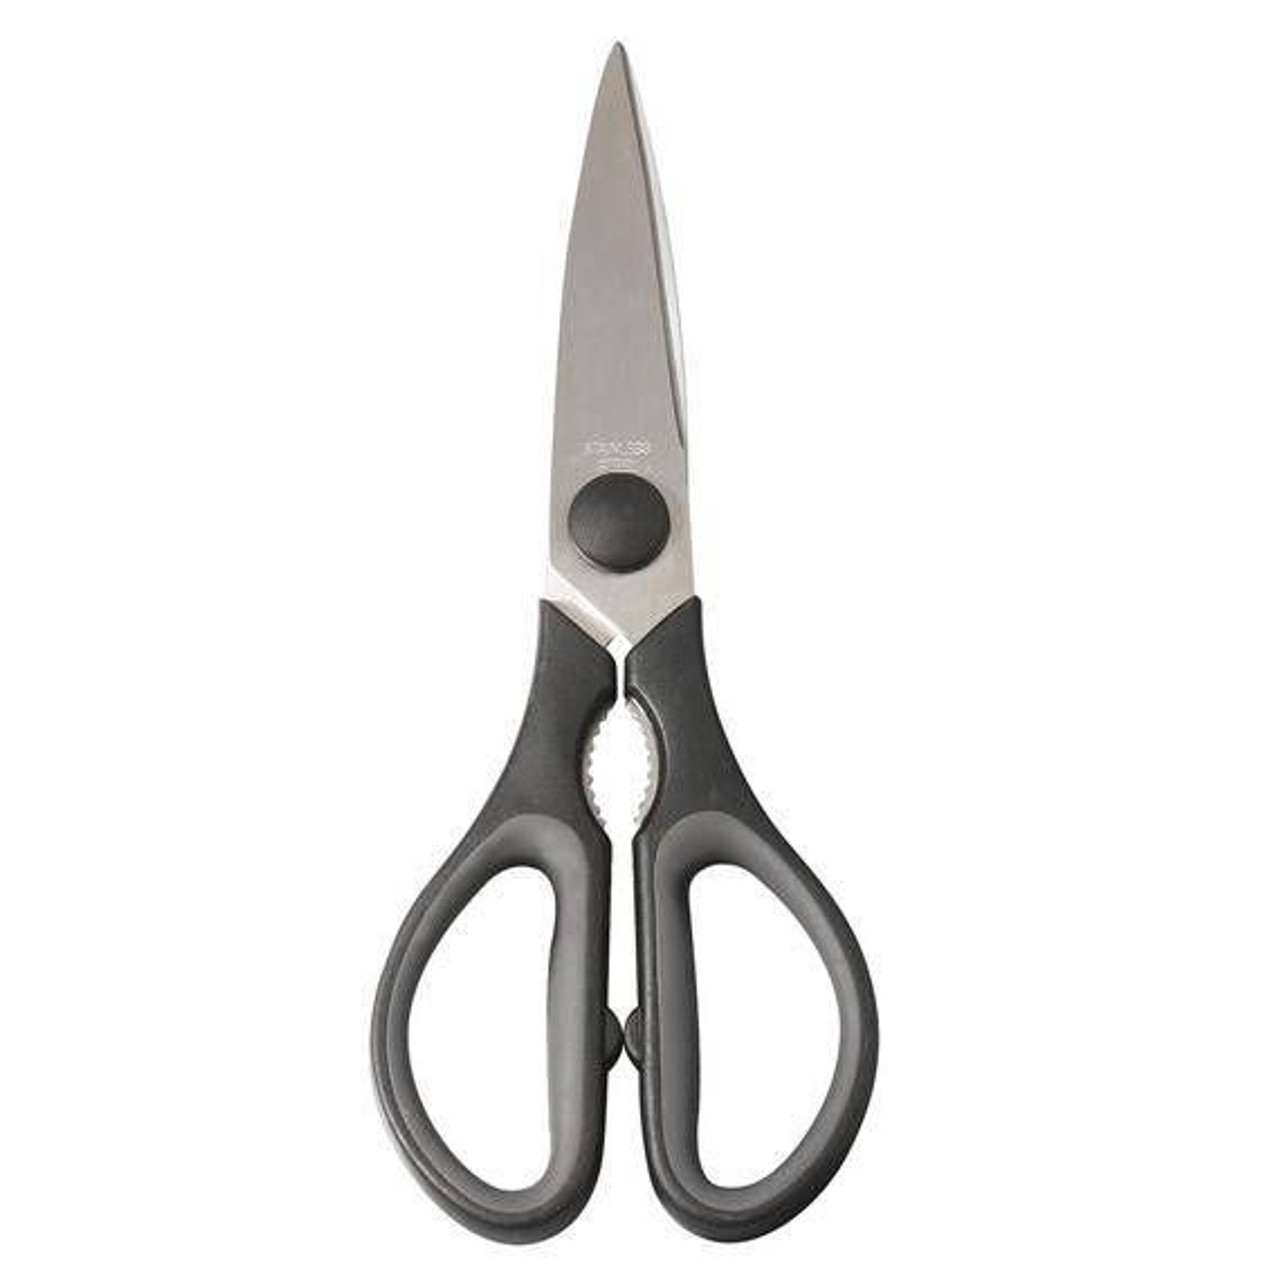 Culinary Edge 8 Stainless Steel Kitchen Shears with Cushion Grip Handles